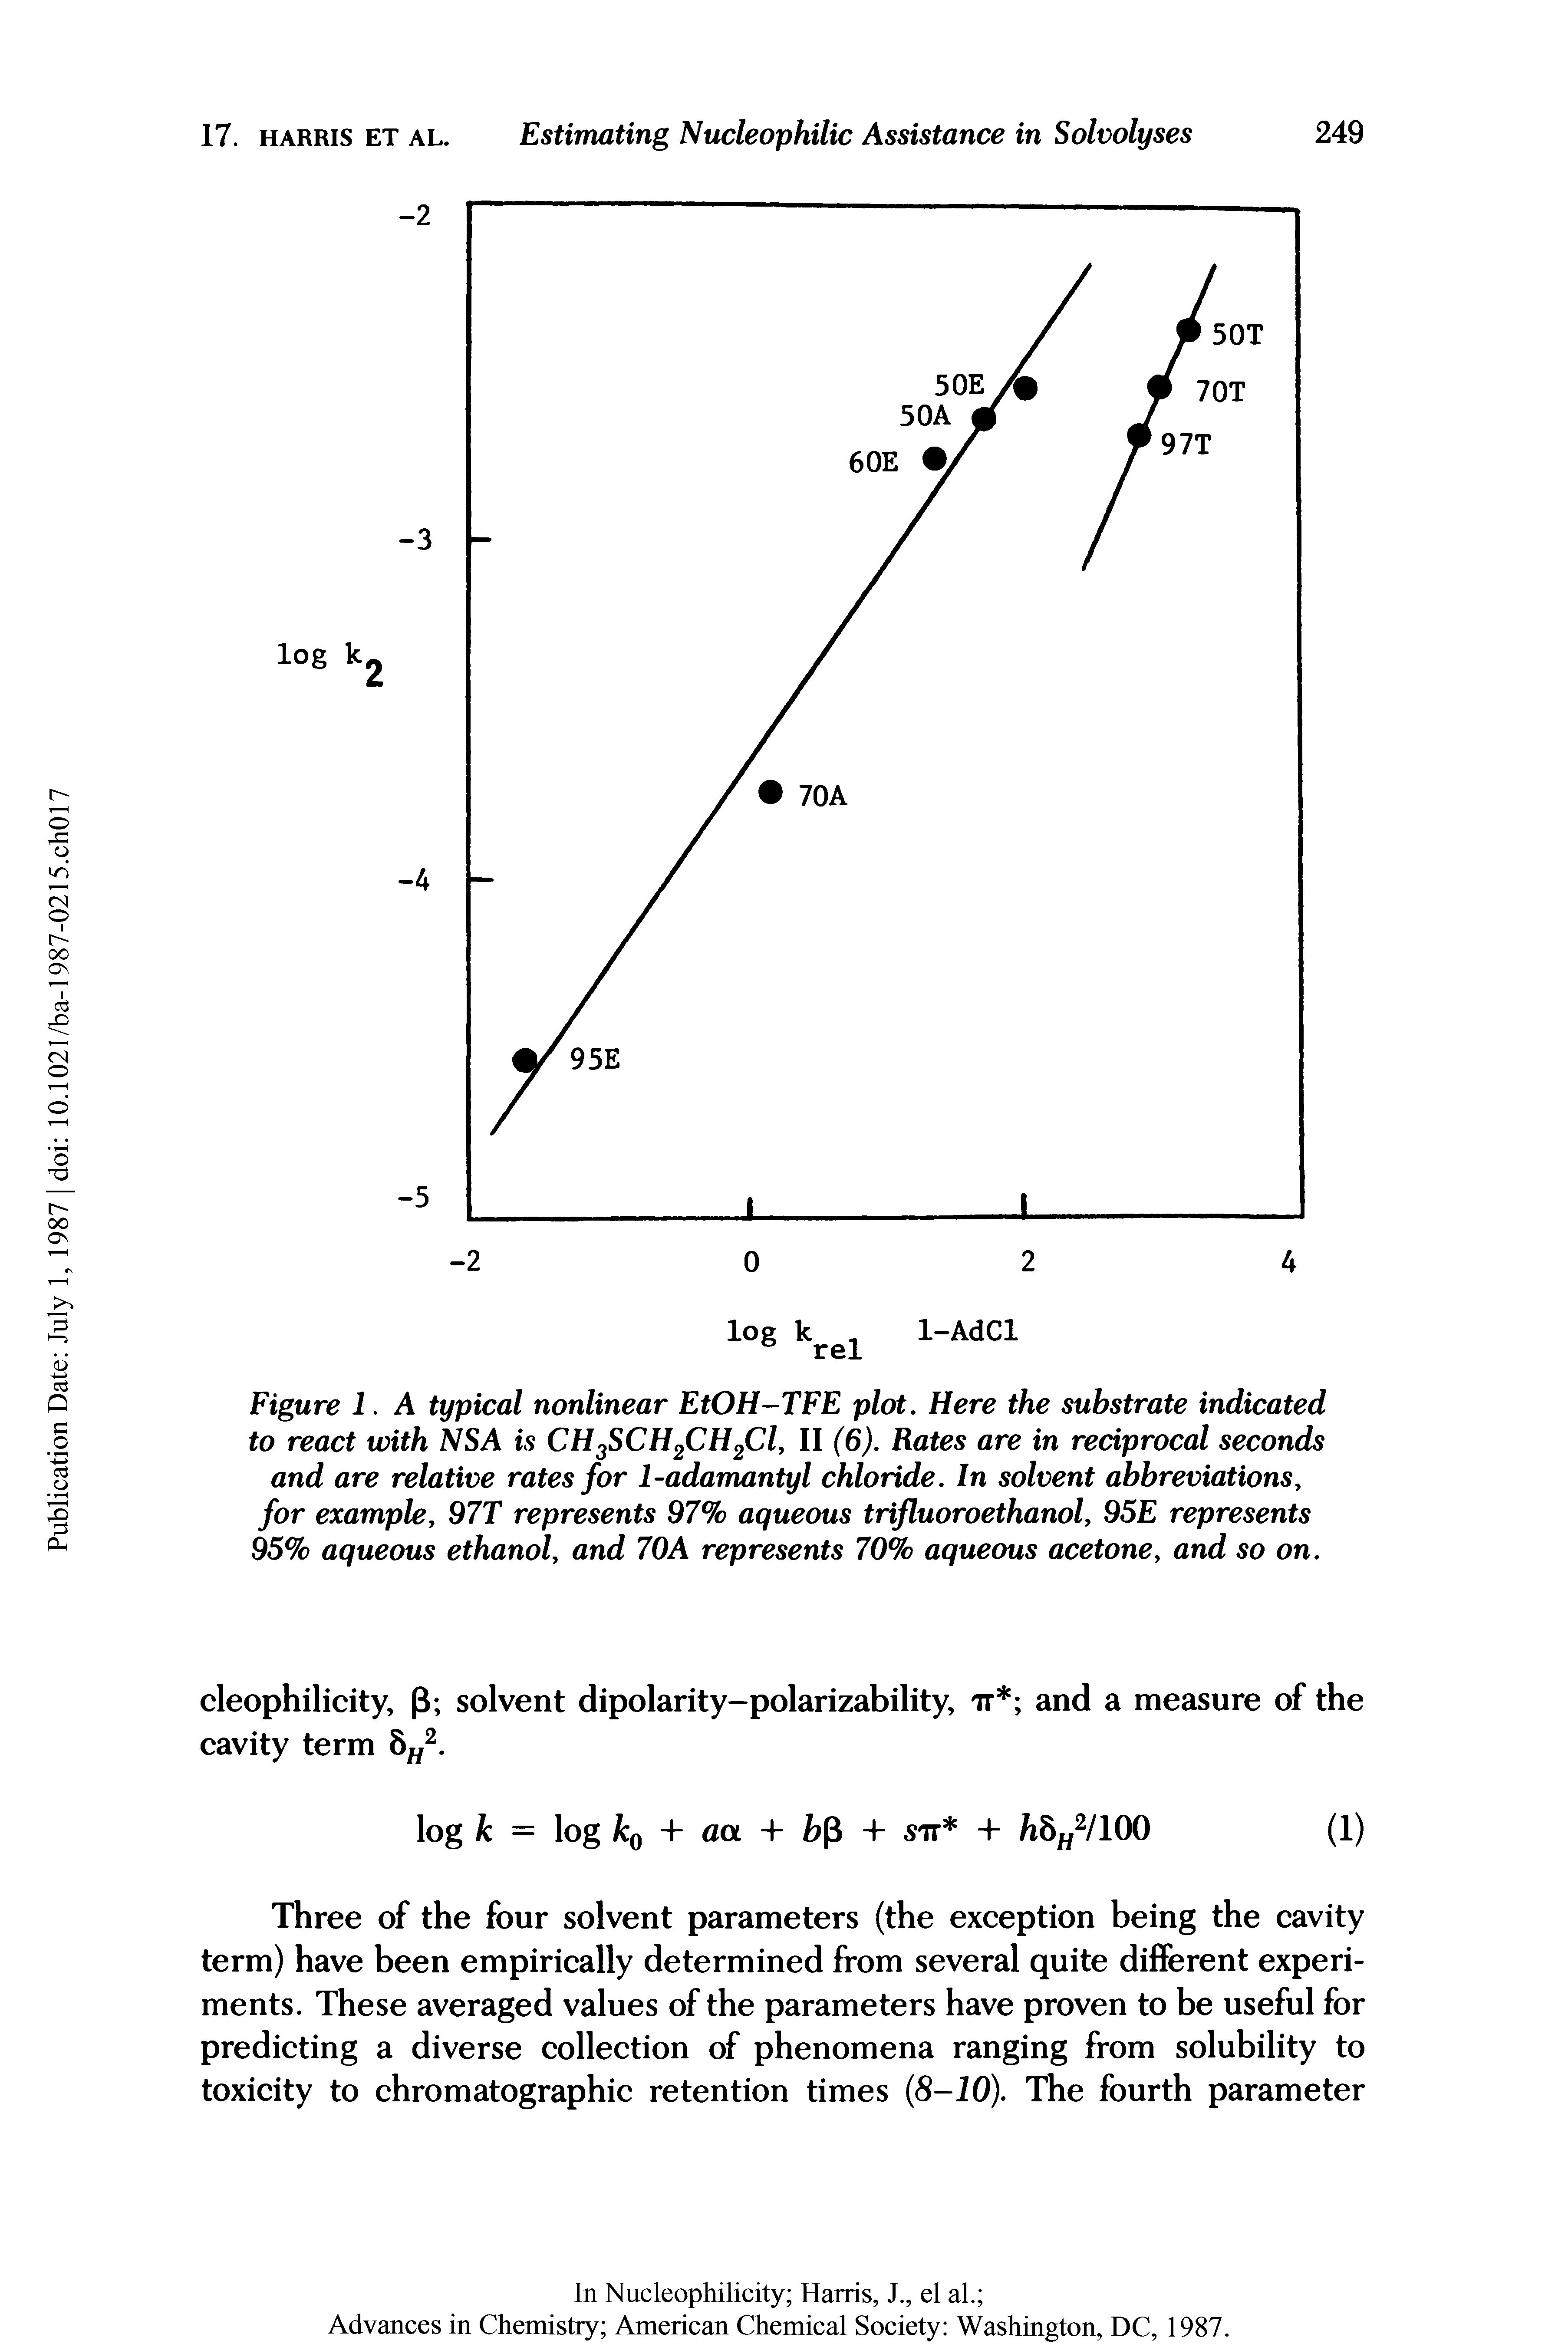 Figure 1. A typical nonlinear EtOH-TFE plot. Here the substrate indicated to react with NSA is CH3SCH2CH2Cl, II (6). Rates are in reciprocal seconds and are relative rates for 1-adamantyl chloride. In solvent abbreviations, for example, 97T represents 97% aqueous trifluoroethanol, 95E represents 95% aqueous ethanol, and 70A represents 70% aqueous acetone, and so on.